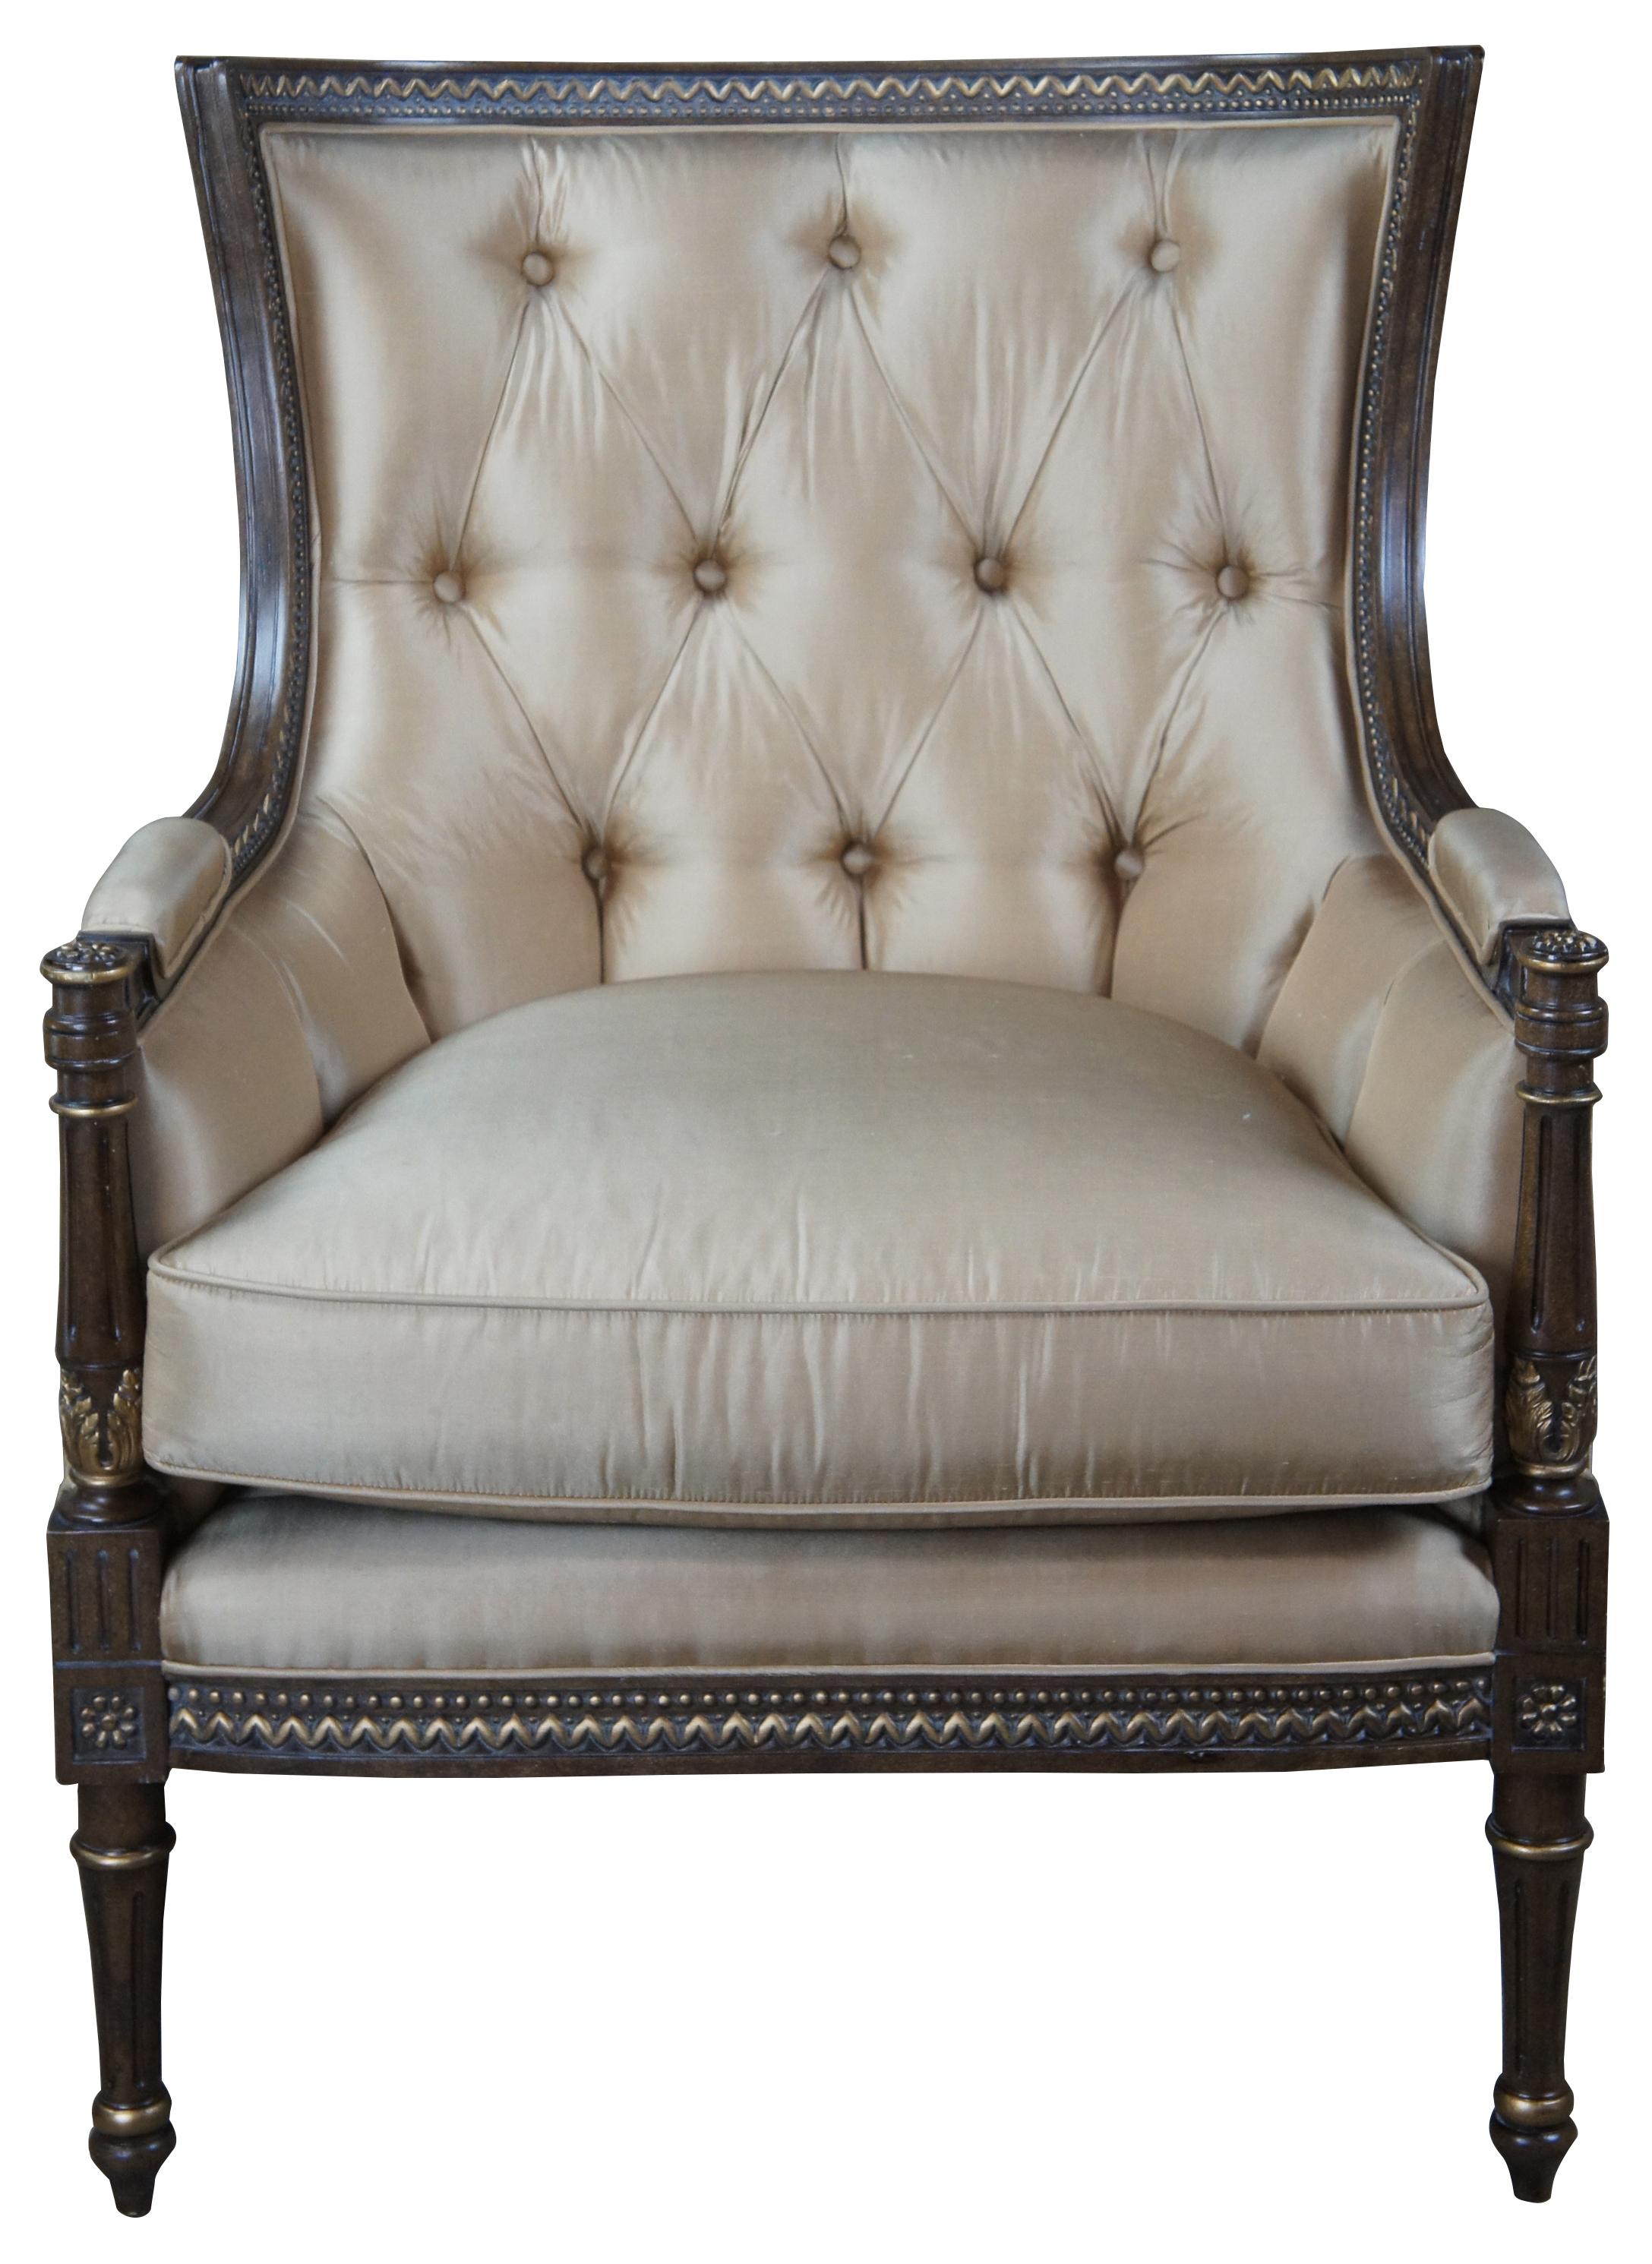 Century Furniture tufted wingback chair. Classic Louis XV styling with an intricately carved frame over reeded and tapered legs leading to arrow feet.
 